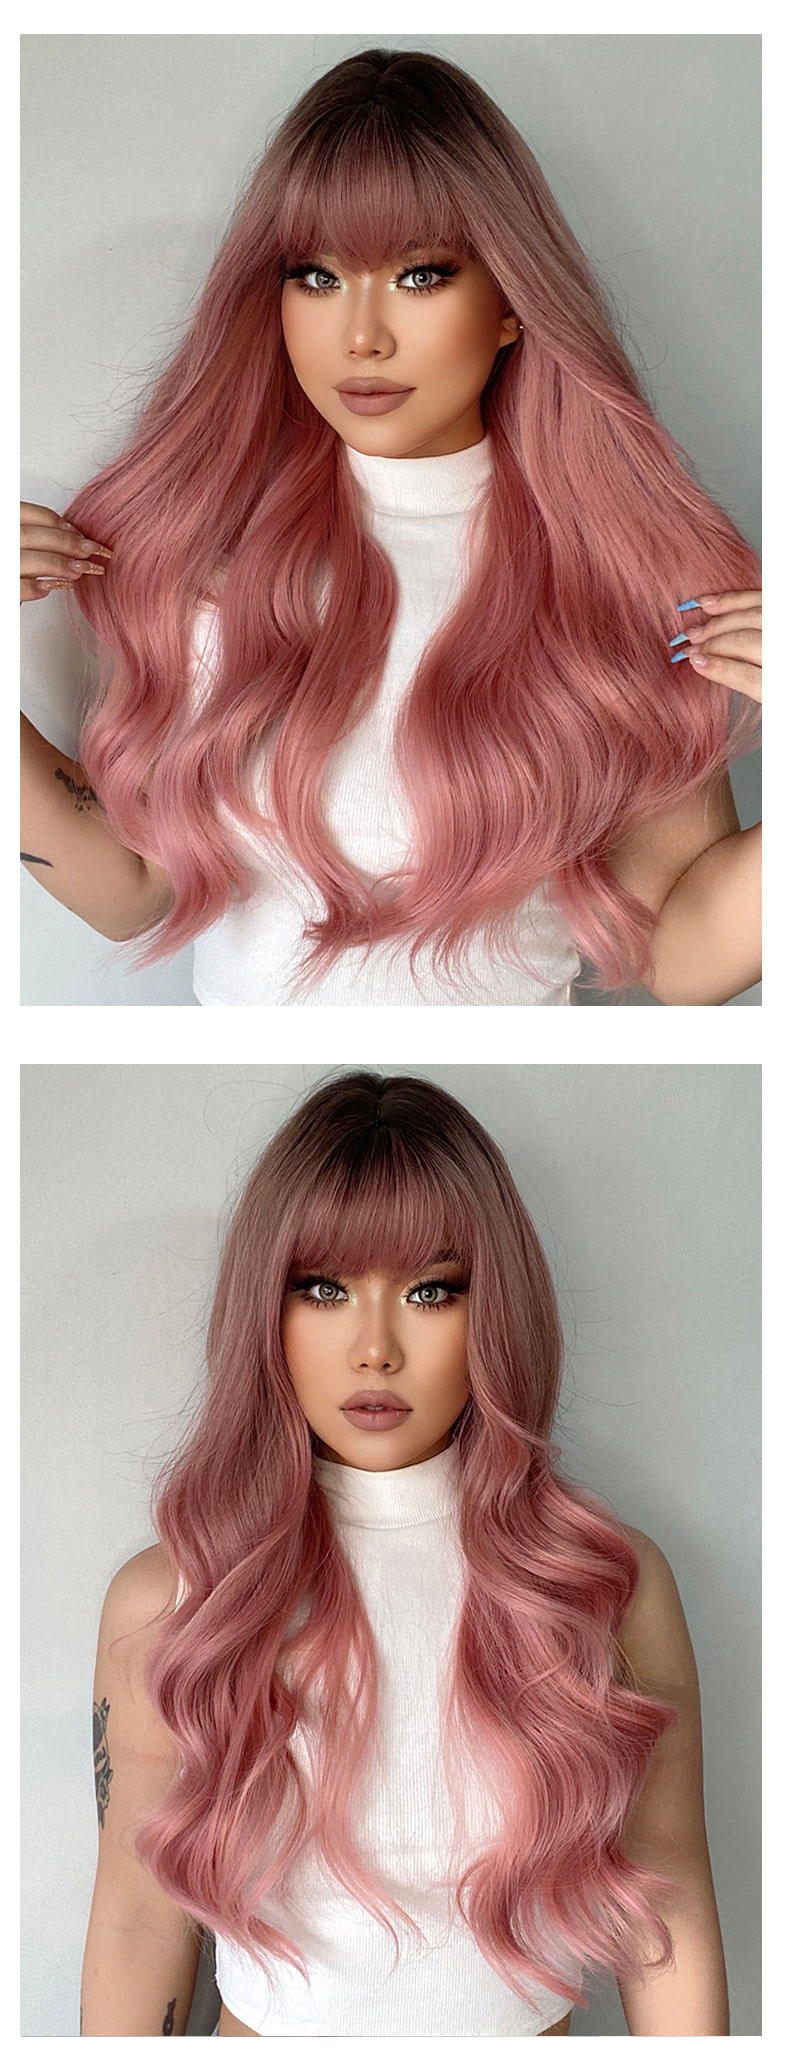 Sweet Aesthetic Pink Wave Wig with Bangs for Women Girl08